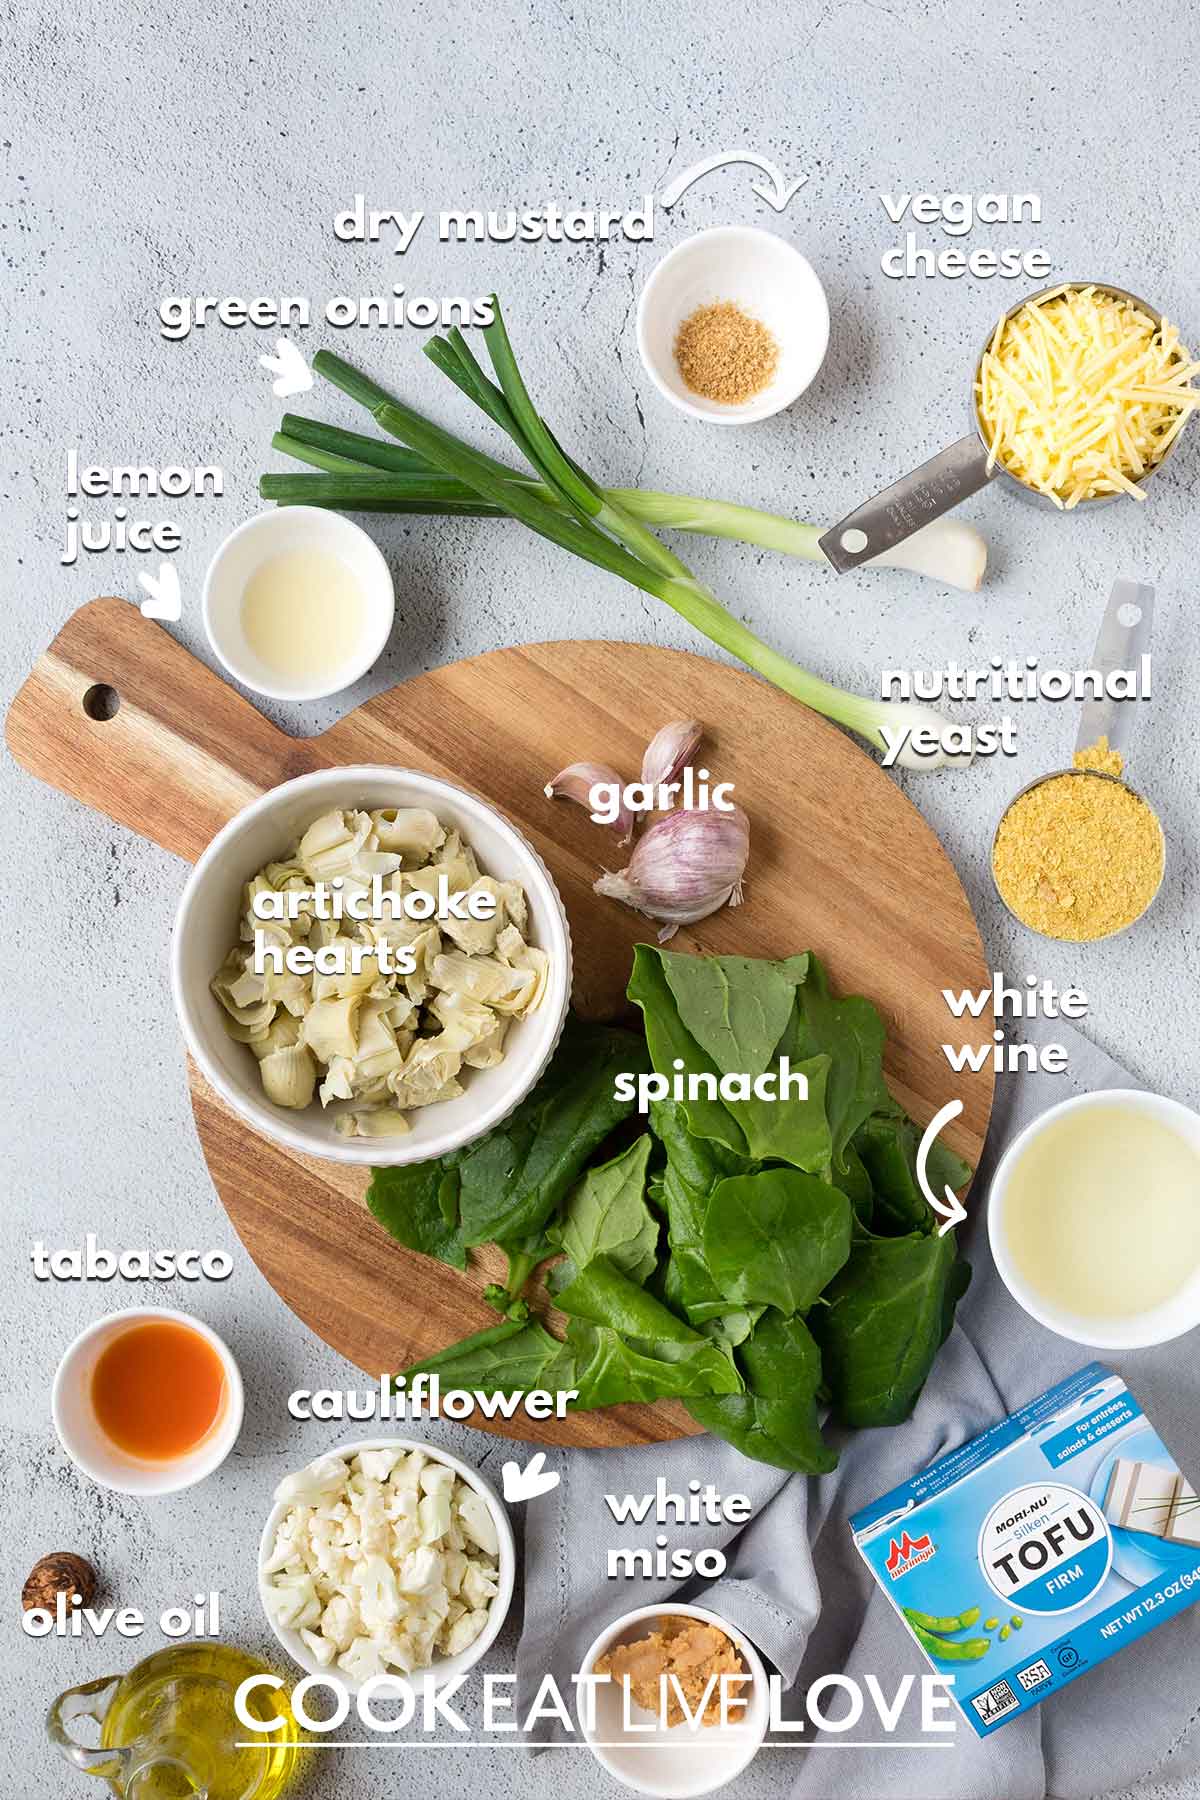 Ingredients to make dairy free spinach artichoke dip on the table with text labels.